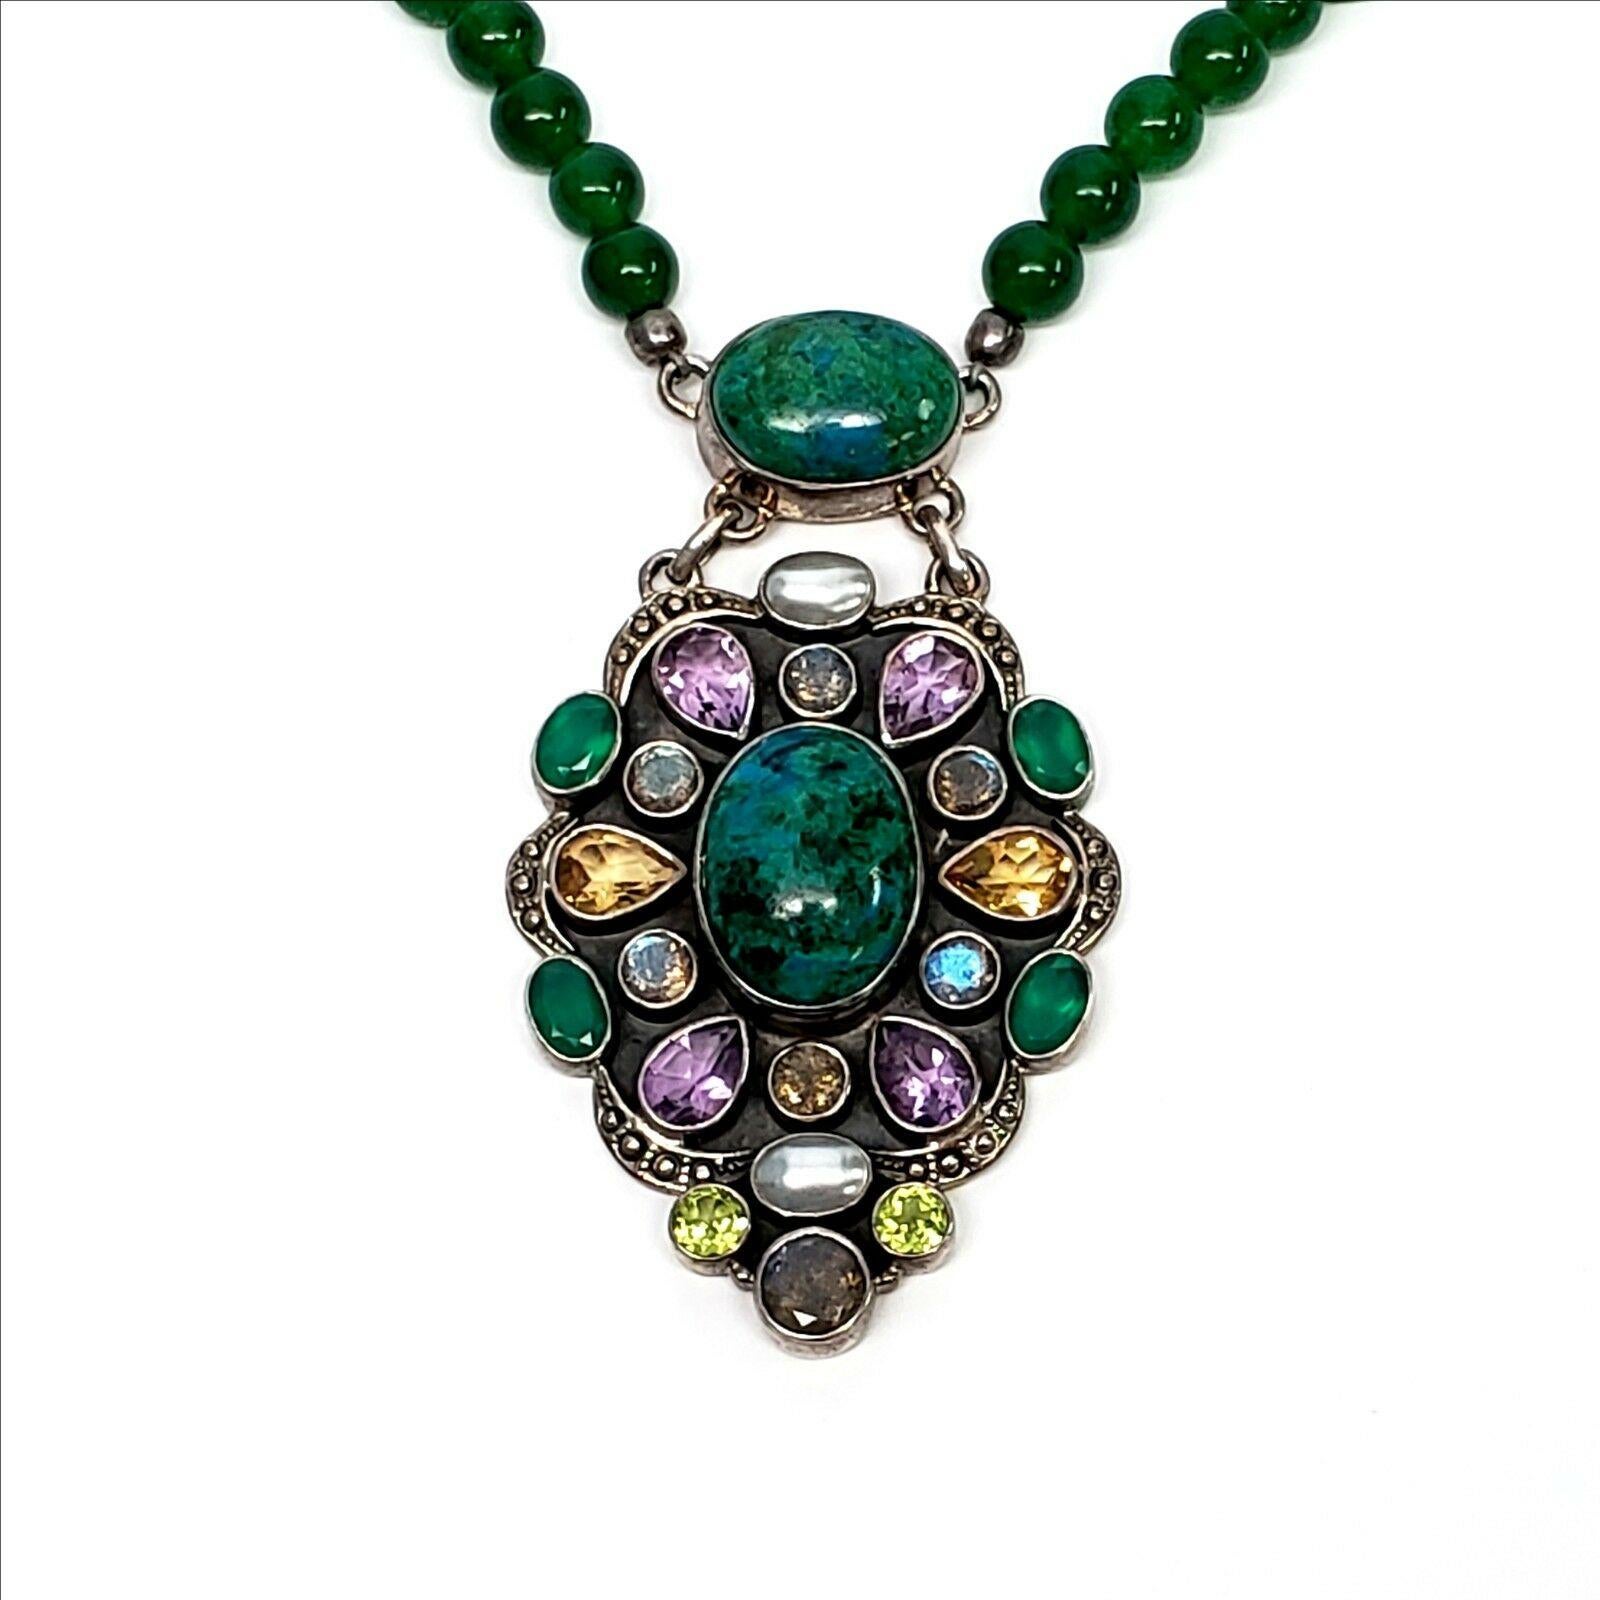 Nicky Butler Sterling Silver and multi-gemstone beaded necklace with large pendant.

This is a unique limited edition piece from Nicky Butler's Raj collection featuring a green quartz beaded necklace and a large pendant with gemstones that appear to